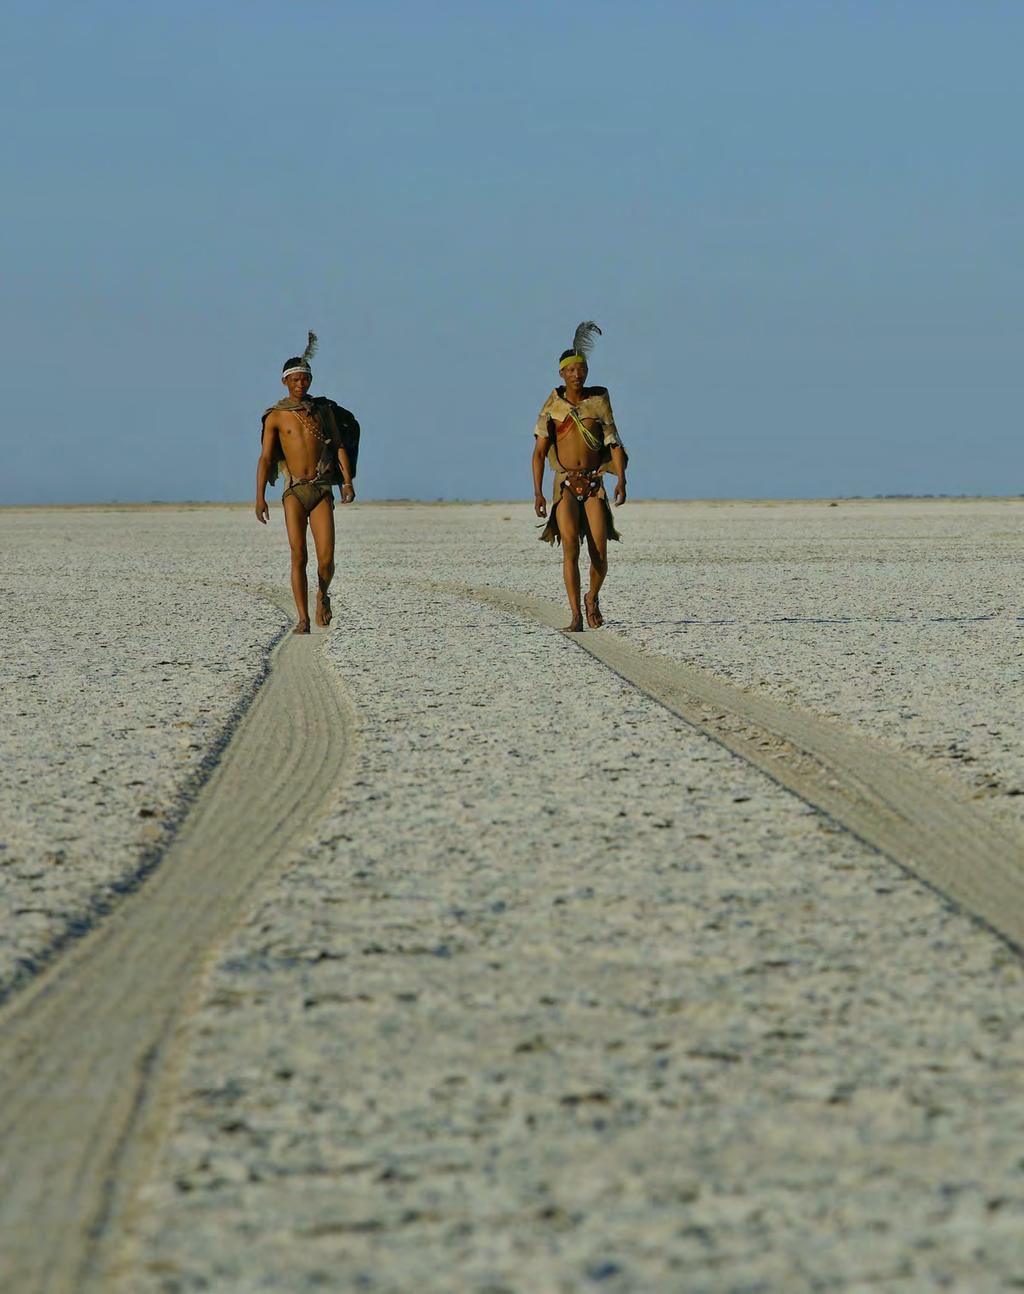 DAYS 9 & 10 MENO A KWENA CAMP MAKGADIKGADI PANS Meno A Kwena Camp Genetic evidence suggests that the nomadic San (Bushmen) are one of the oldest peoples in the world.